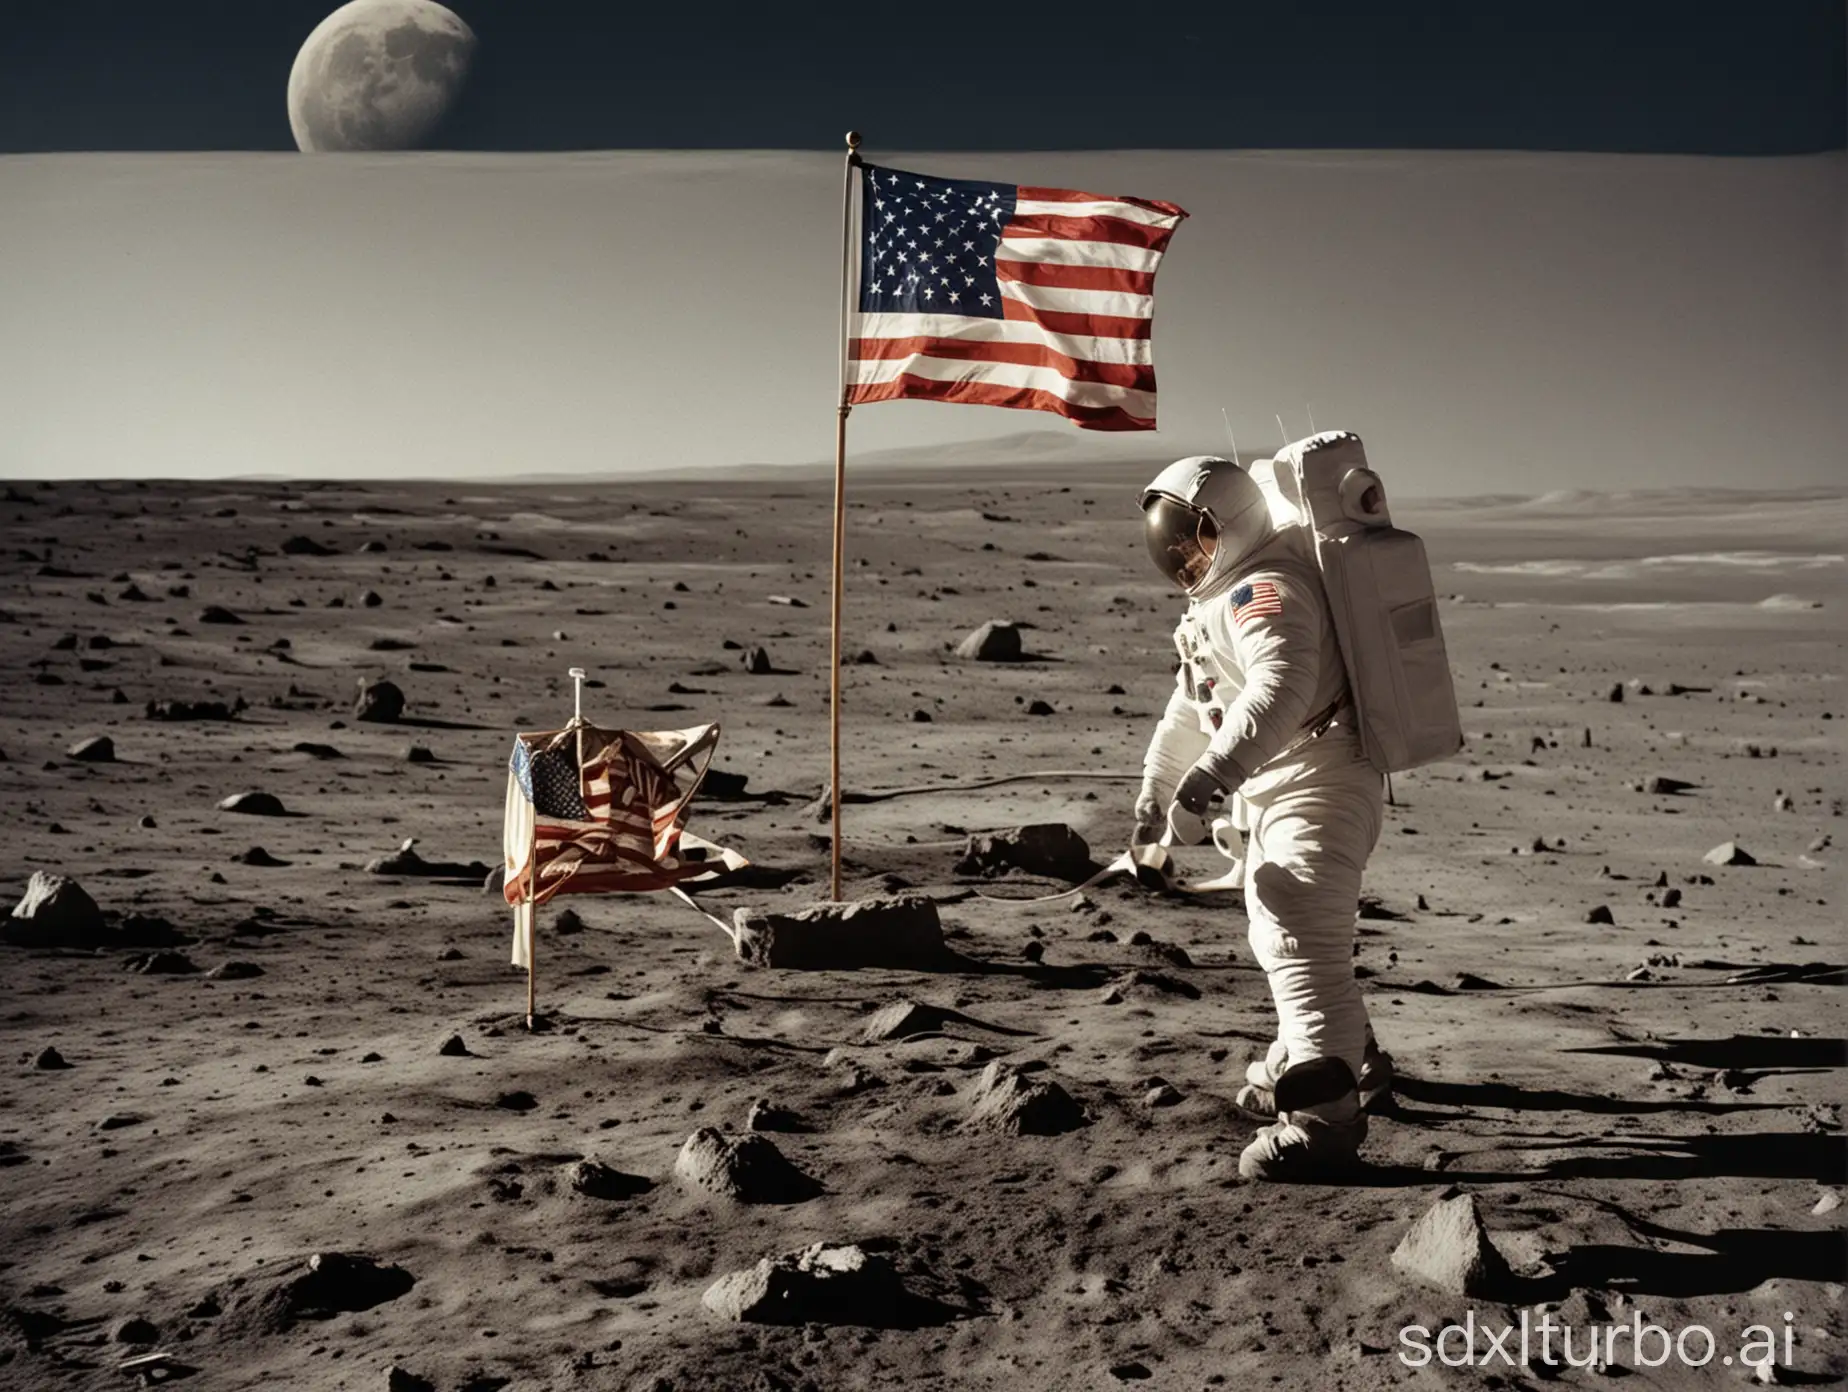 Astronaut-with-Moon-Landing-Flag-in-Lunar-Landscape